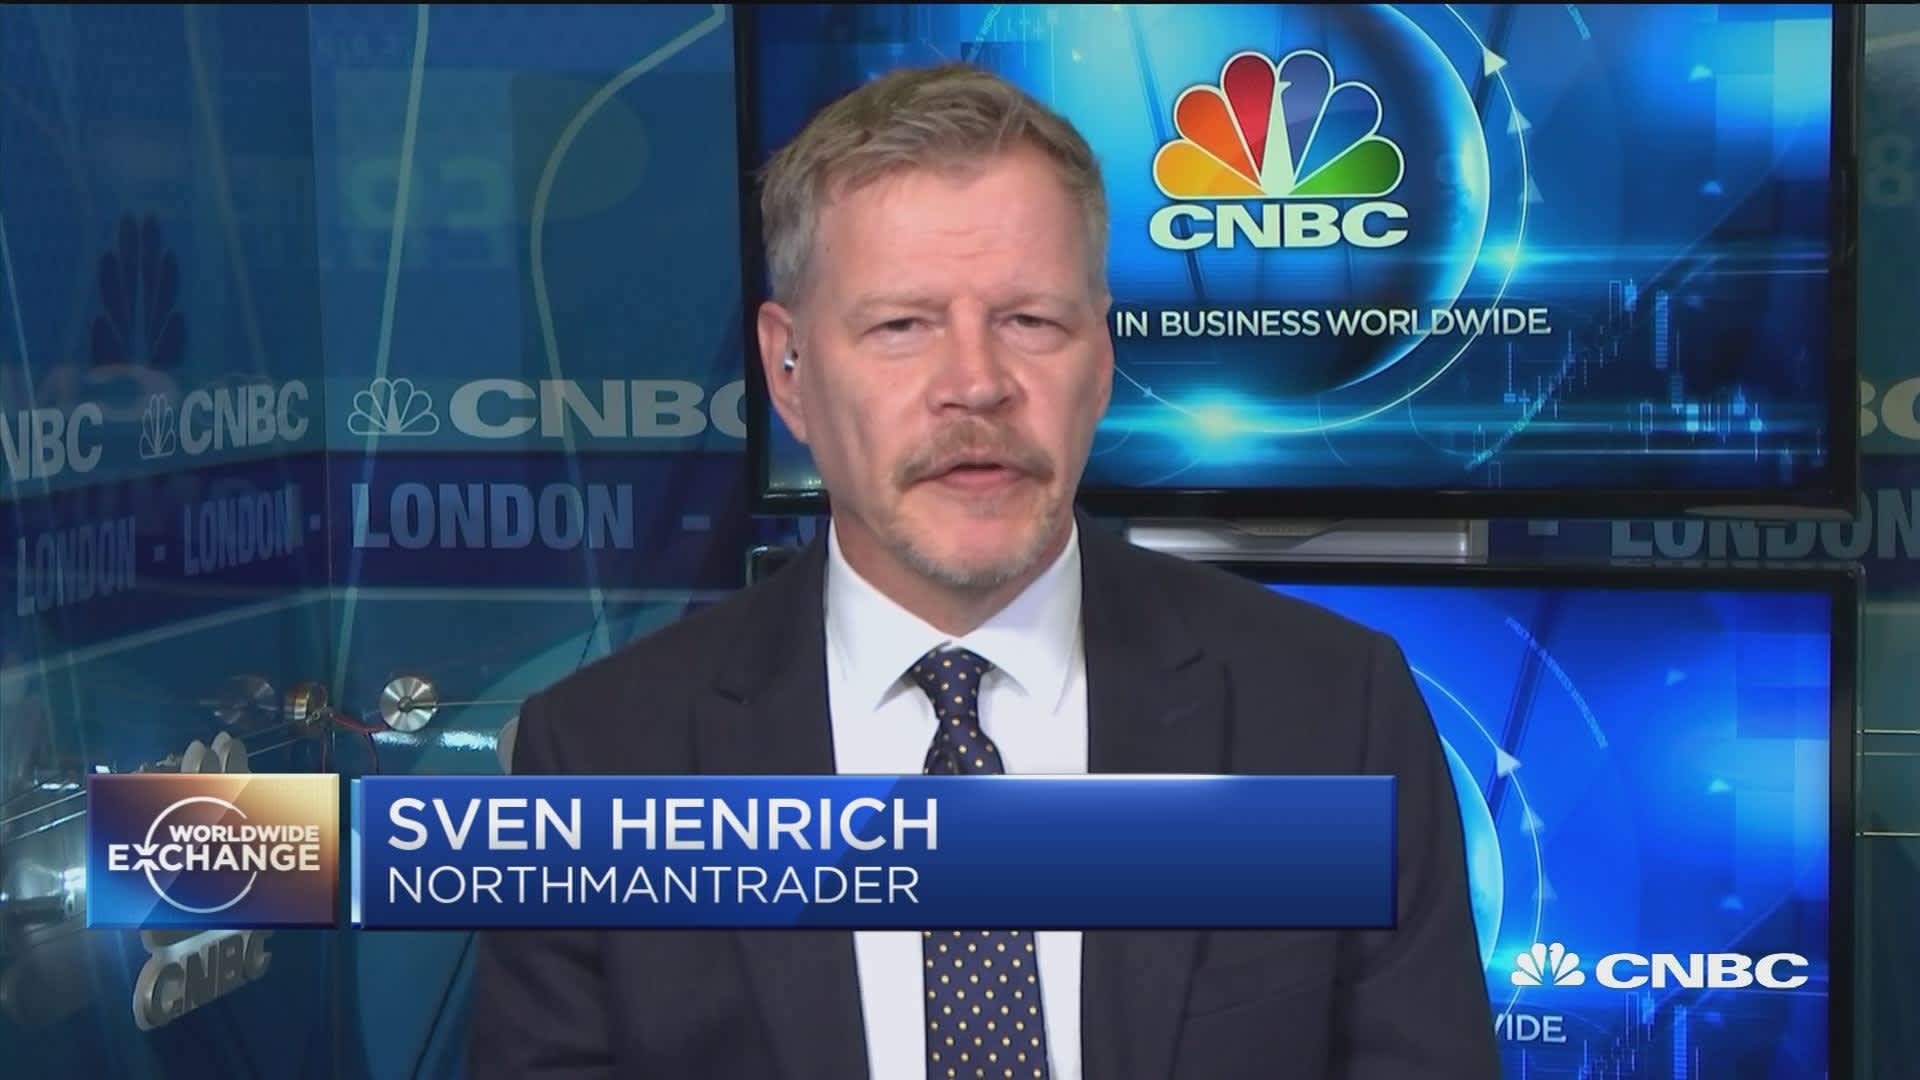 Sven Henrich comments on the recent Bitcoin rally